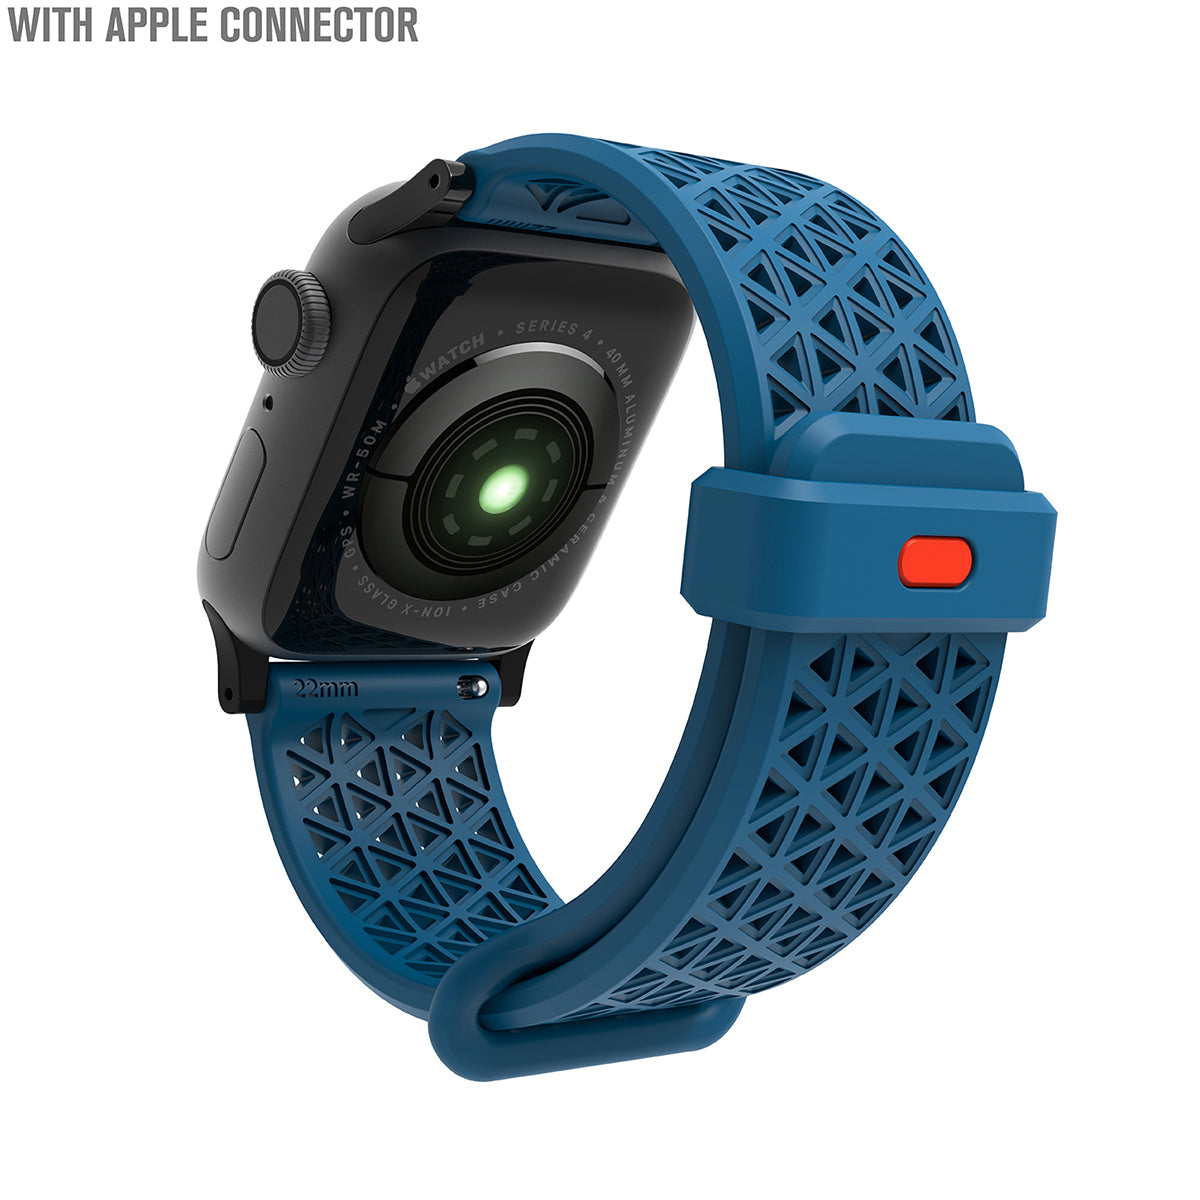 catalyst apple watch series 9 8 7 6 5 4 se gen 2 1 38 40 41mm sports band with apple connector apple watch back view with sports band blueridge text reads with apple connector